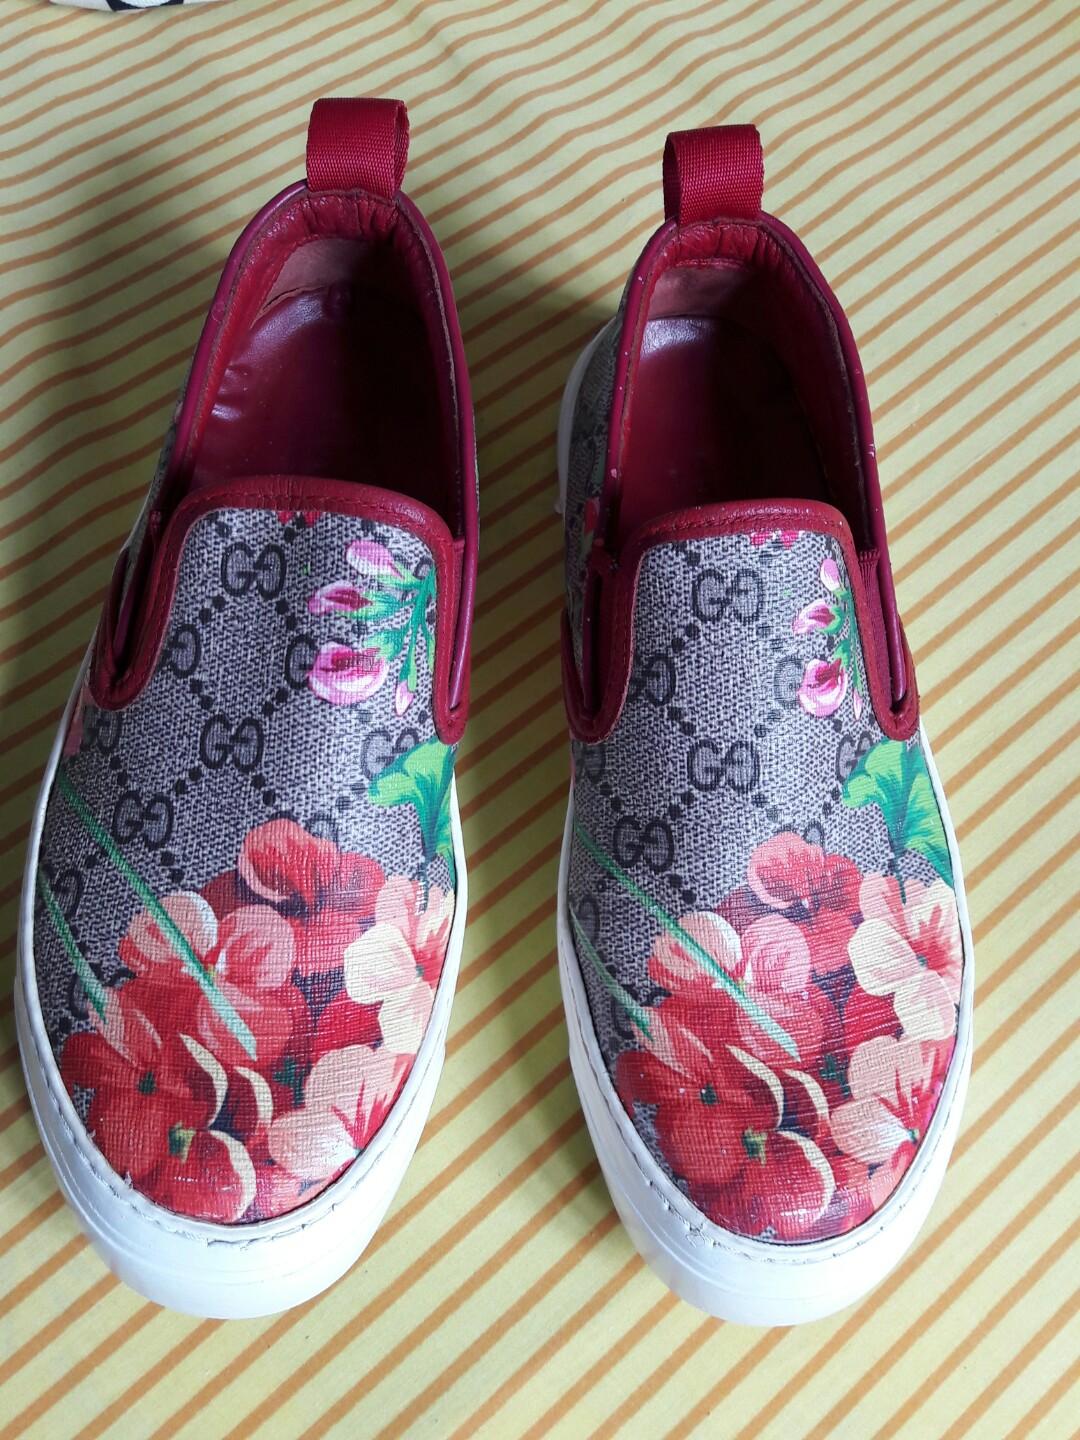 under Distraktion forråde Gucci Tian GG Supreme Slip On Floral Sneakers, Women's Fashion, Footwear,  Sneakers on Carousell